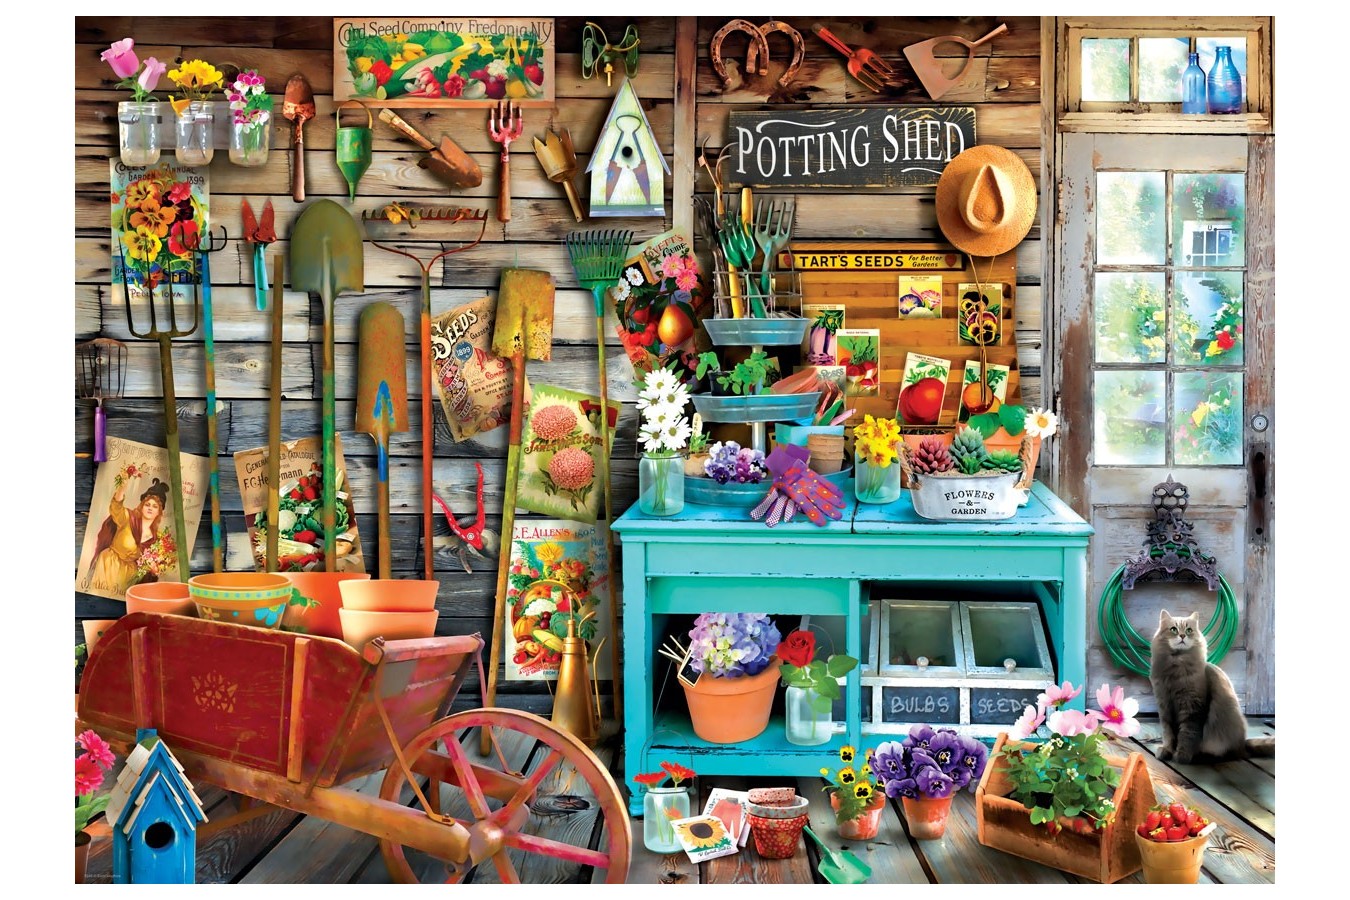 Puzzle Eurographics - The Potting Shed, 1000 piese (6000-5346)